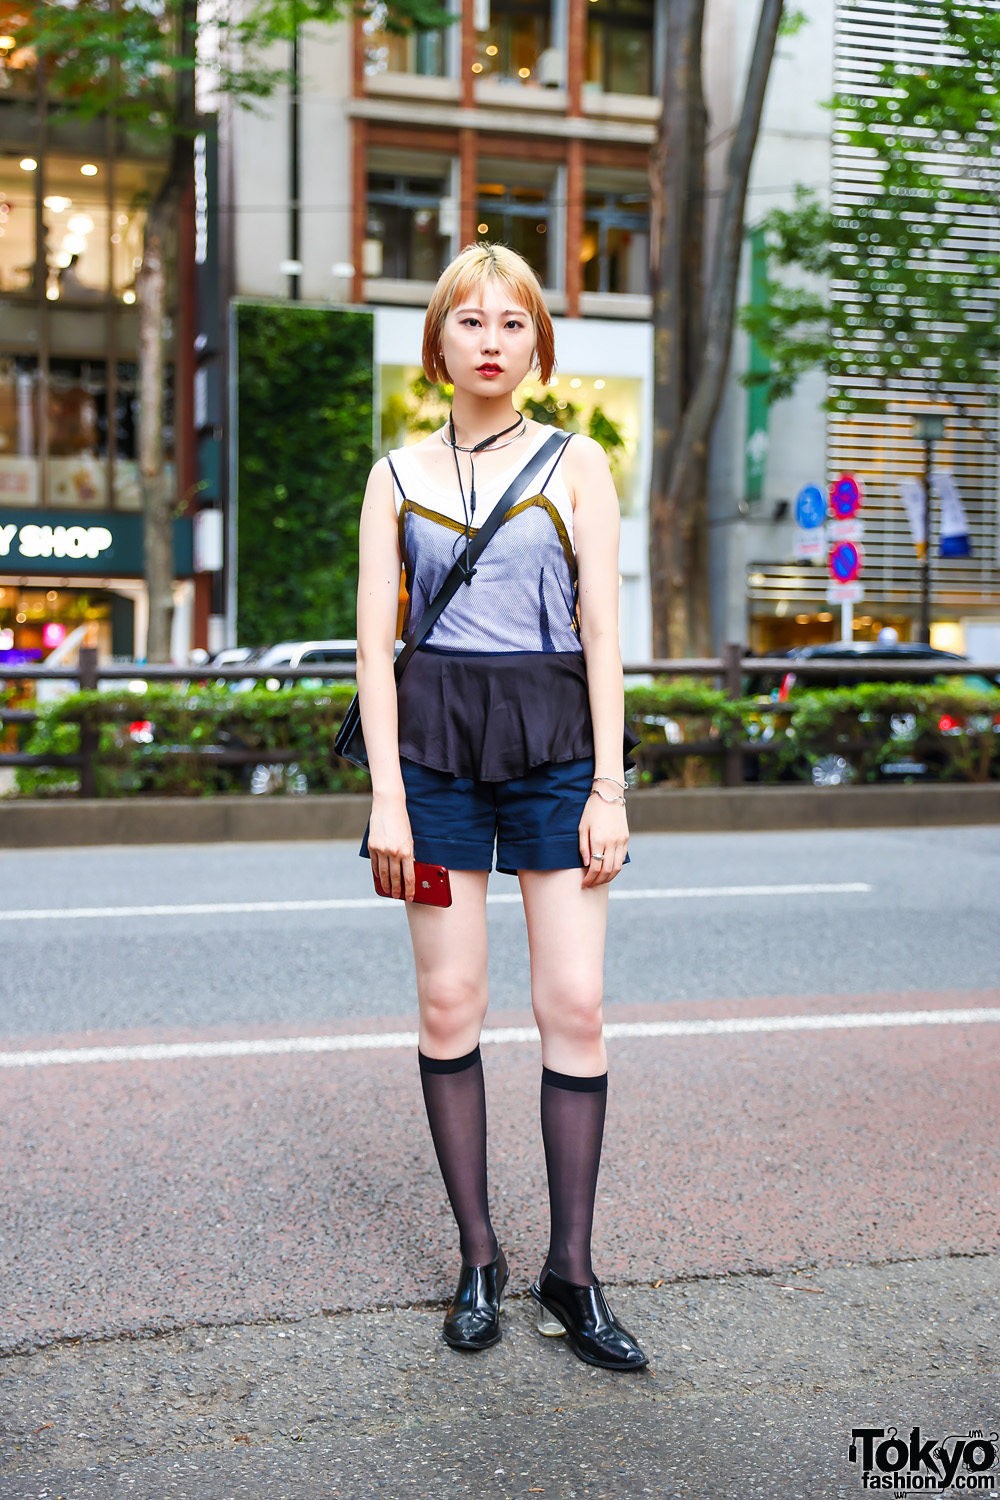 Harajuku Street Style w/ Torque Collar Necklace, Toga Peplum Mesh Top, Tailored Shorts, Leather Sling Bag & Soffitto Pointy Heeled Mules